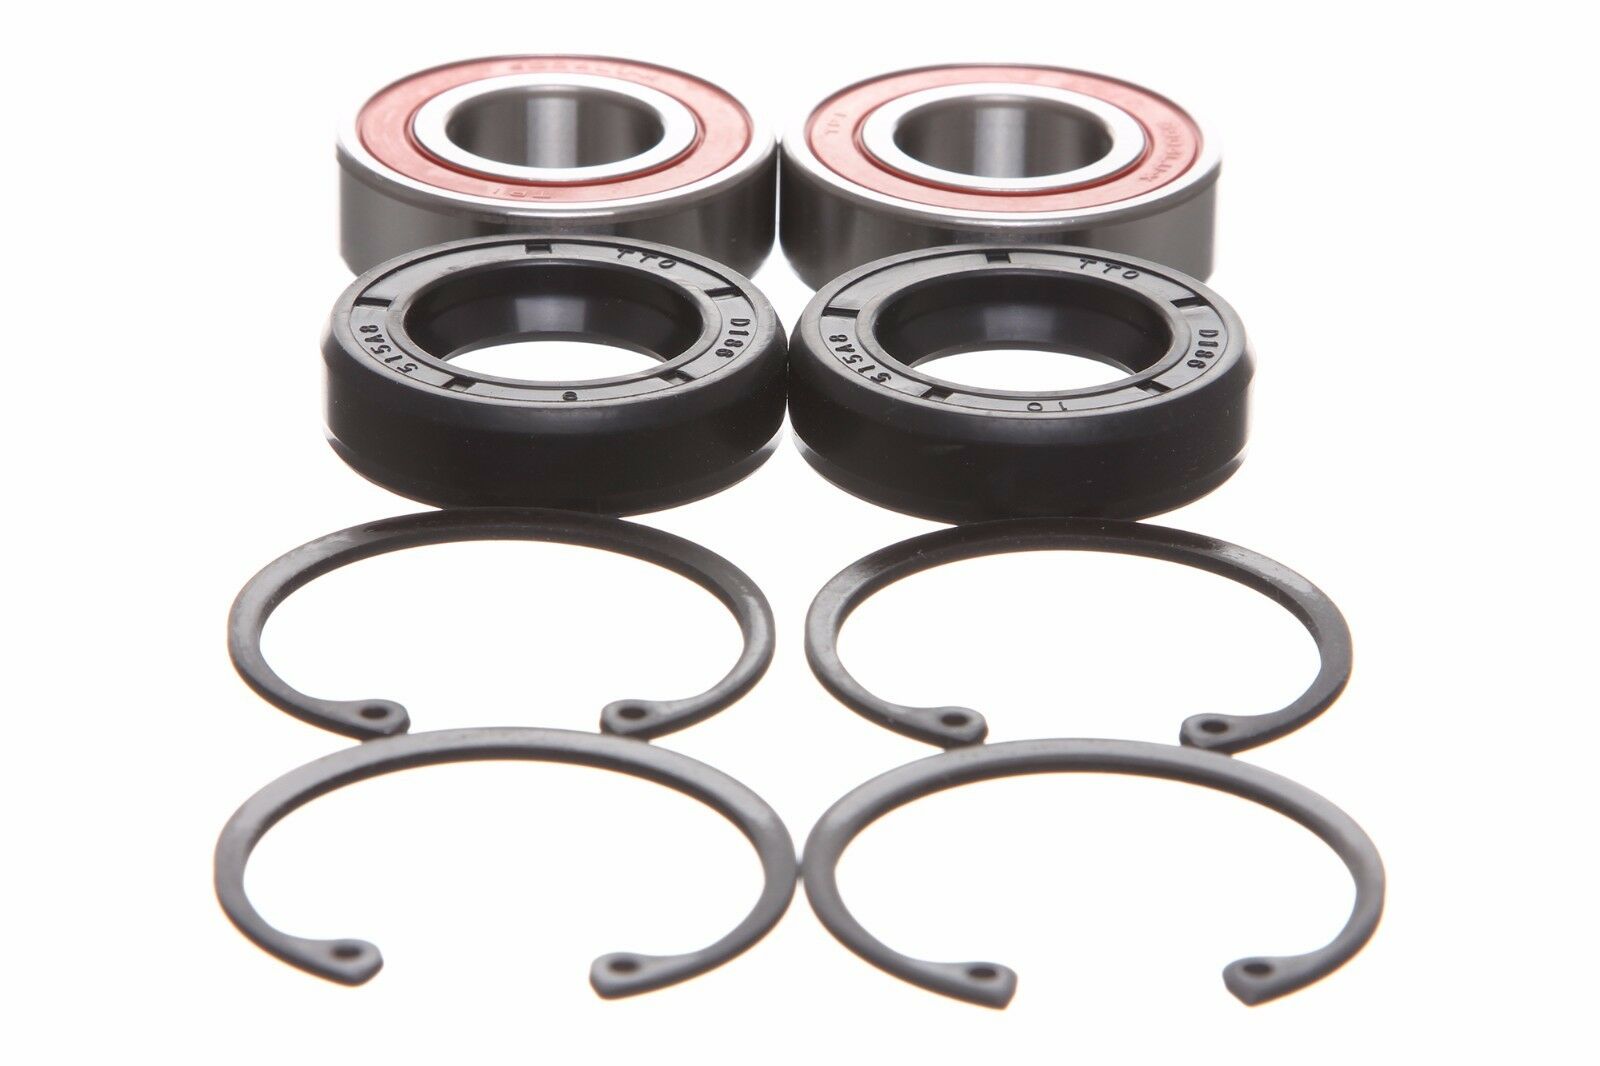 2 Pack Ez Go Rear Axle Bearing & Seal Kit Replaced 611931 15112g1 623044 230-889